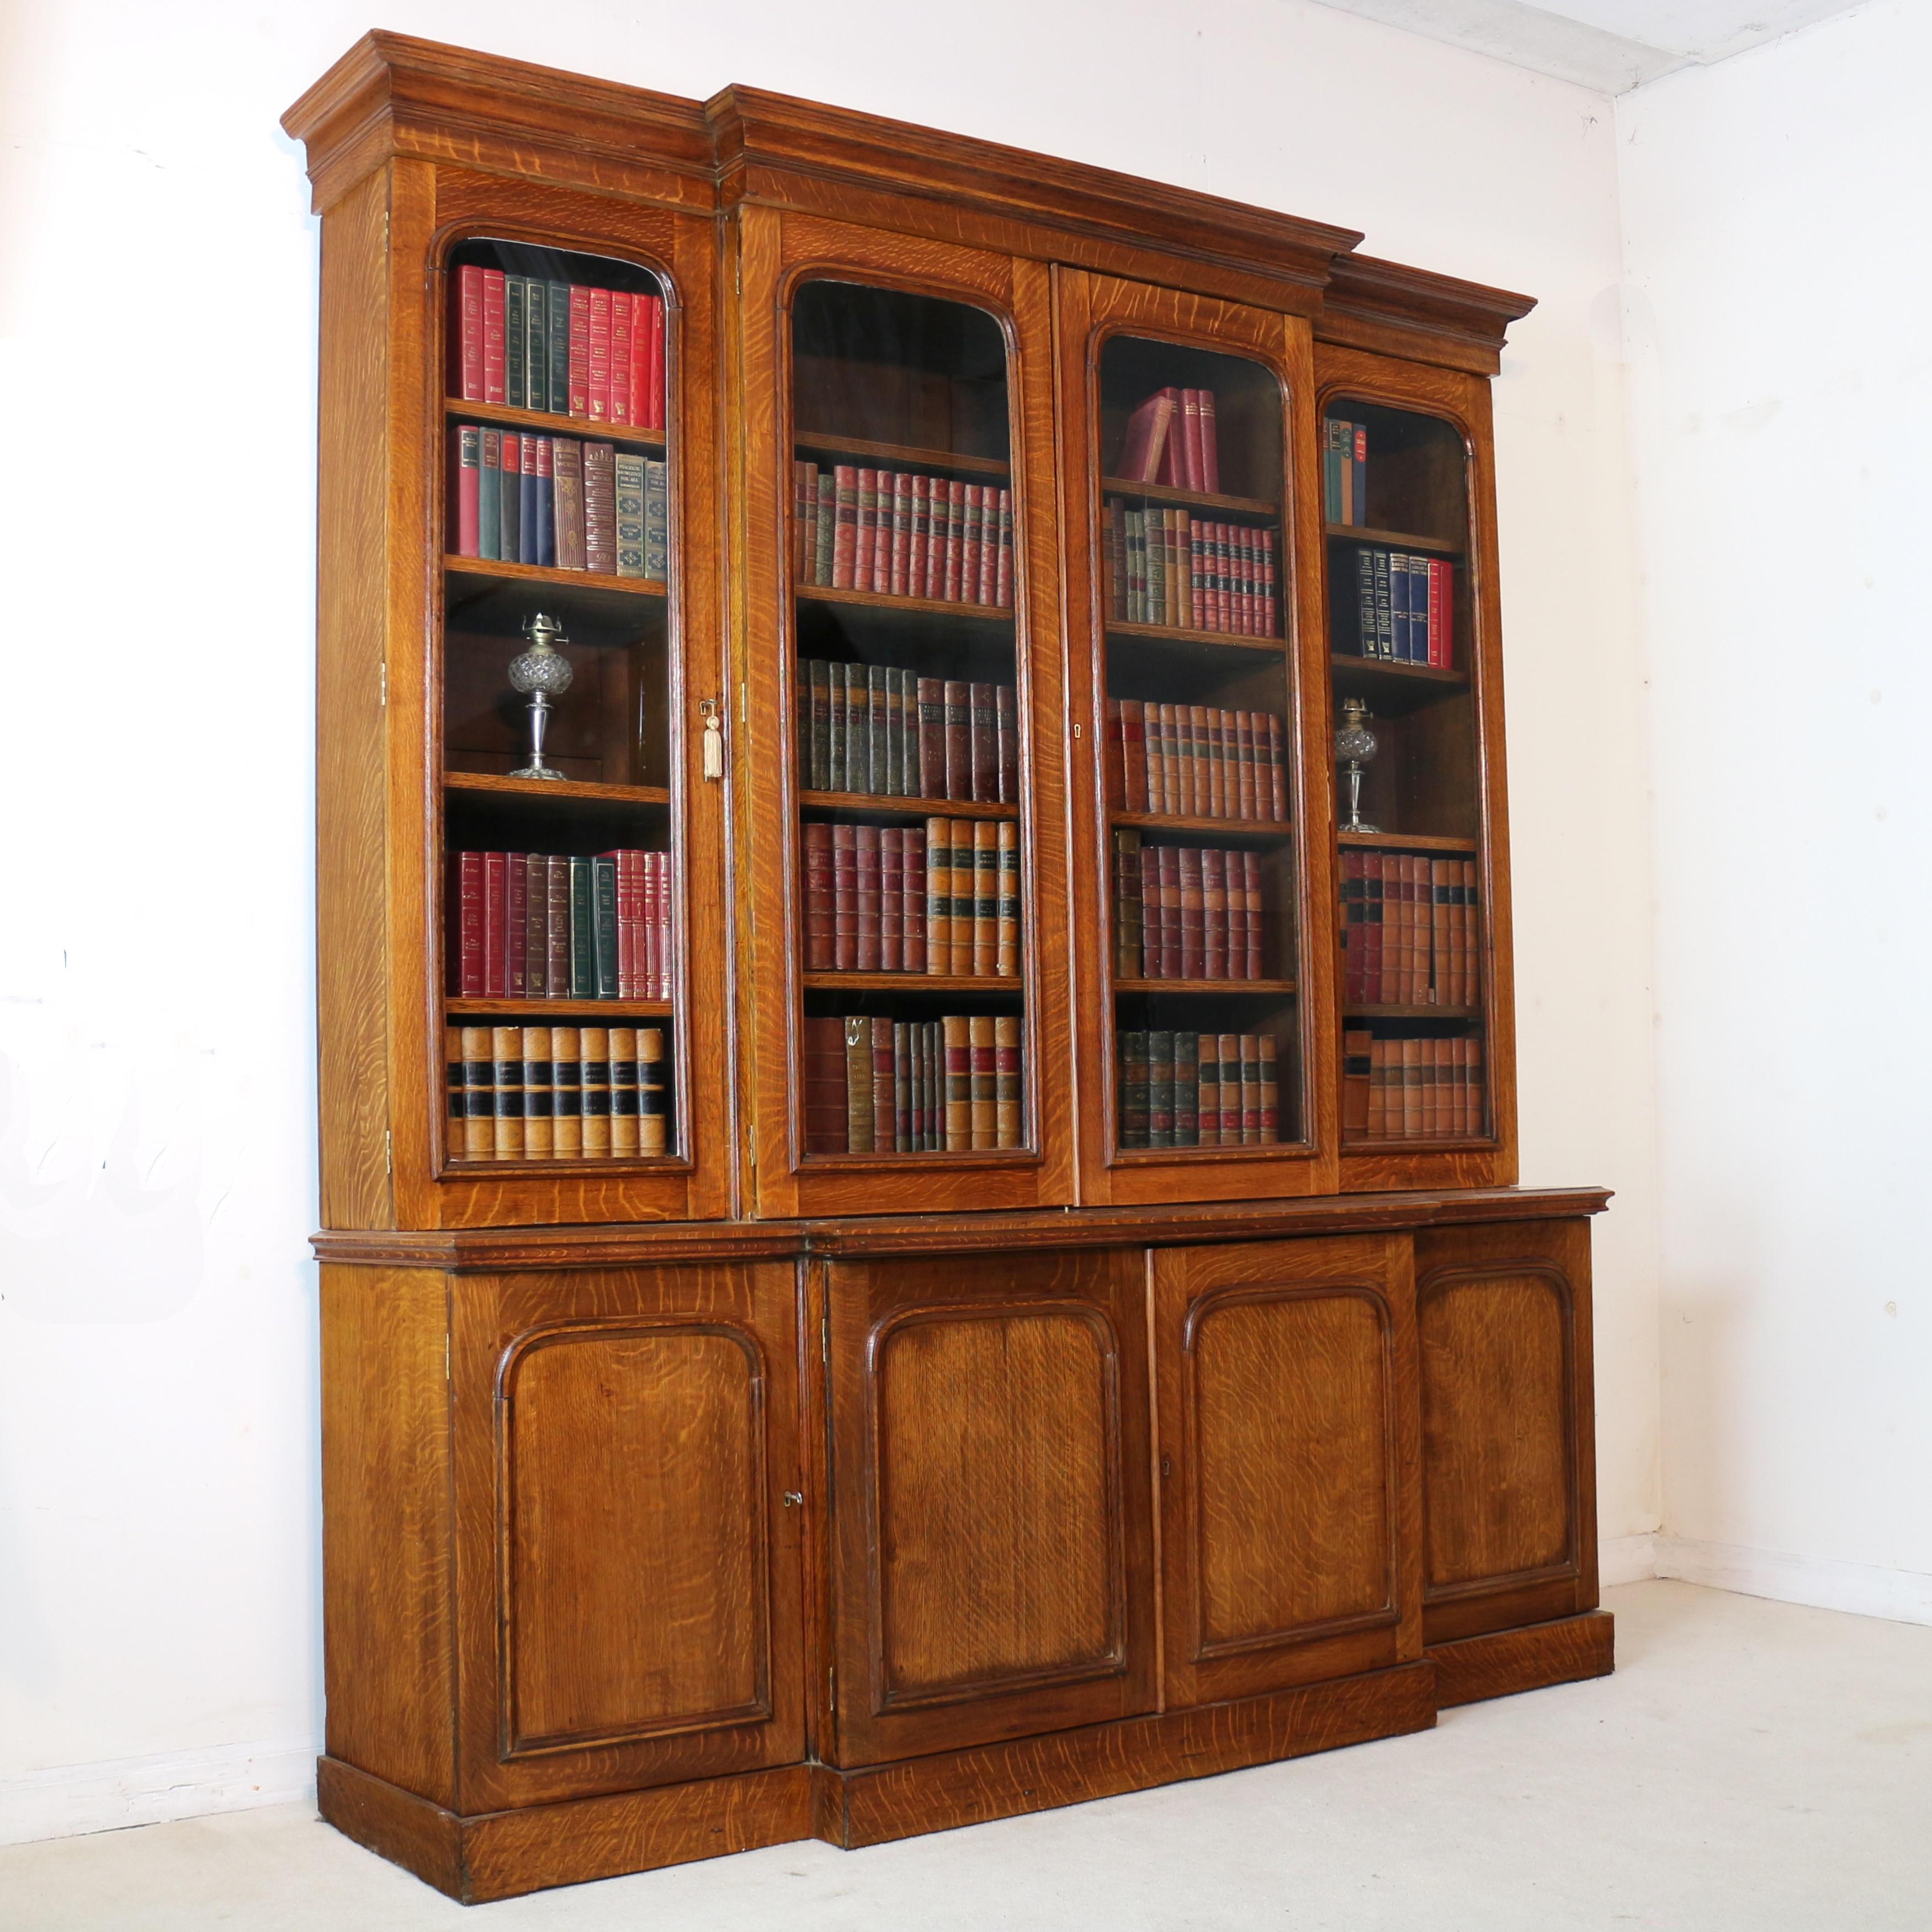 An impressive William IV/early Victorian four door breakfront bookcase or bookcase cabinet. Rare to find such a large bookcase in golden quarter-sawn oak which has the attractive ‘tiger grain’ or medullary rays, it has a square cornered moulded